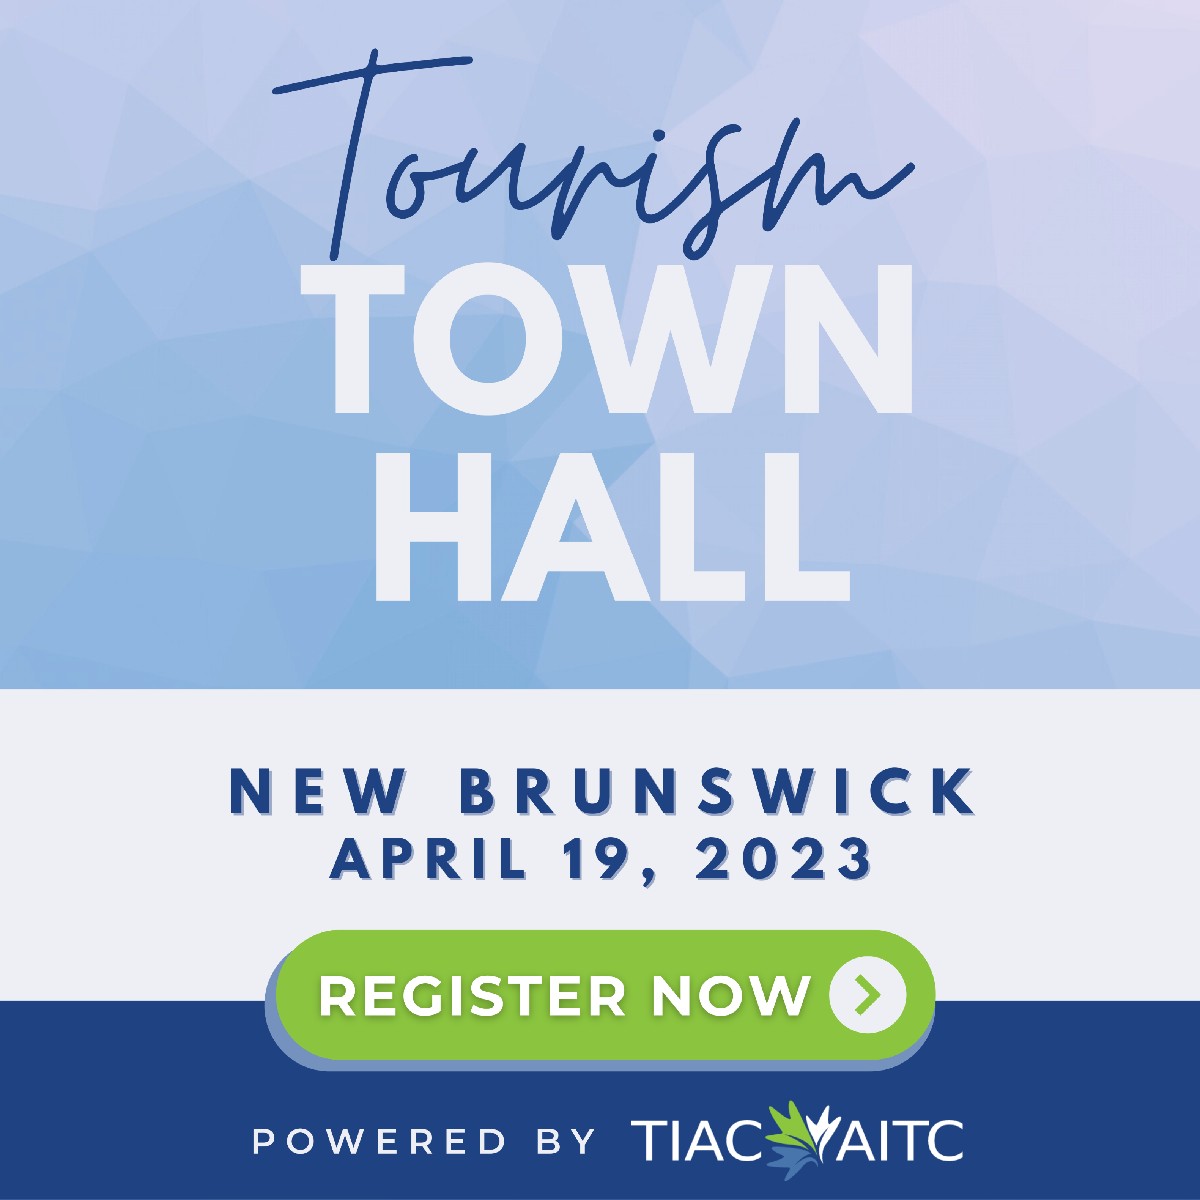 You’re invited to a #TourismTownHall! An industry-wide event delivered by TIAC. Tara Saunders, Director of Business Development of ITAC, will be sharing ITAC’s Indigenous tourism priorities for growth towards its 2030 goals.

Register now - bit.ly/TIACTownHall-NB

#TourismCounts